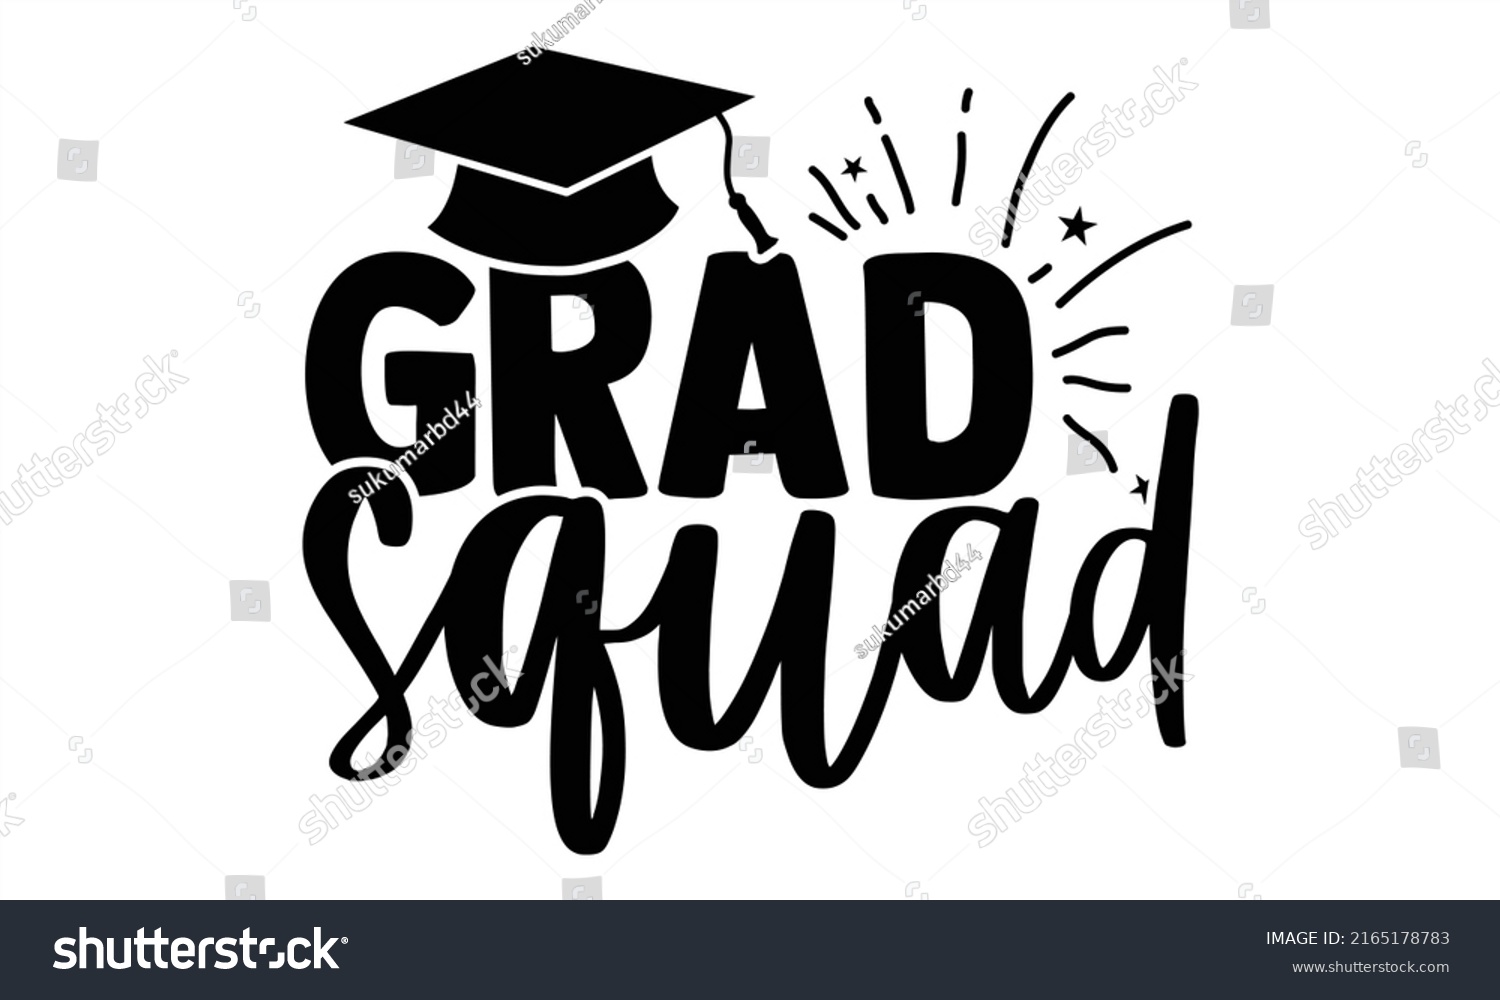 SVG of Grad squad - Graduation t shirts design, Hand drawn lettering phrase, Calligraphy t shirt design, Isolated on white background, svg Files for Cutting Cricut and Silhouette, EPS 10, card, flyer svg